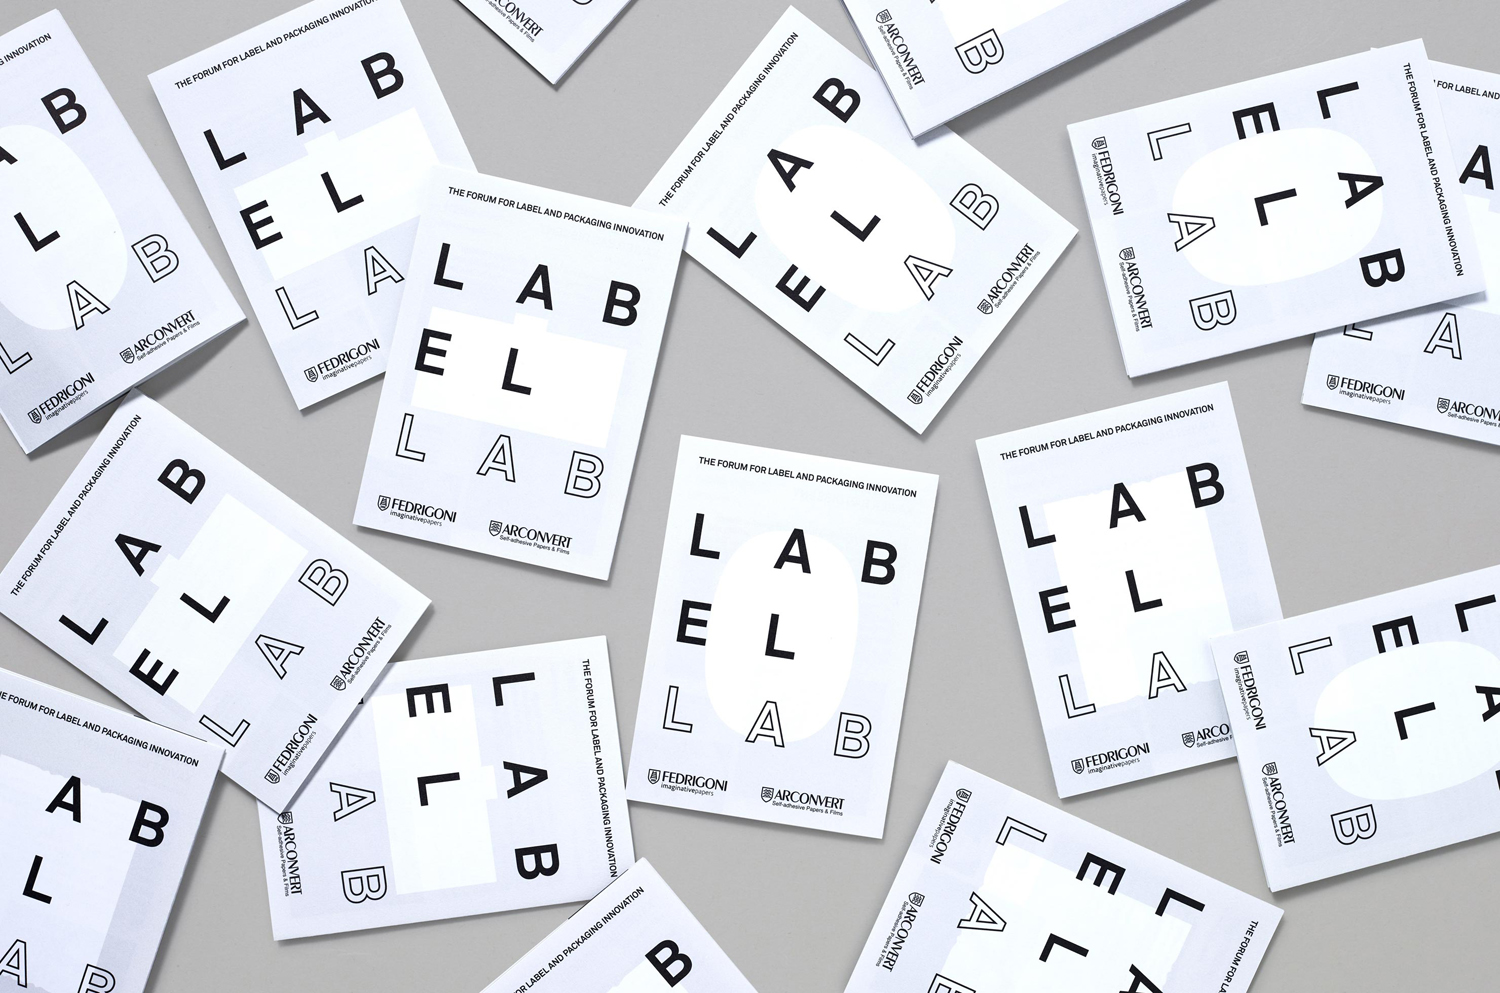 Logotype and programme by TM for Label Lab, The Forum for Label and Packaging Innovation, hosted by Arconvert.